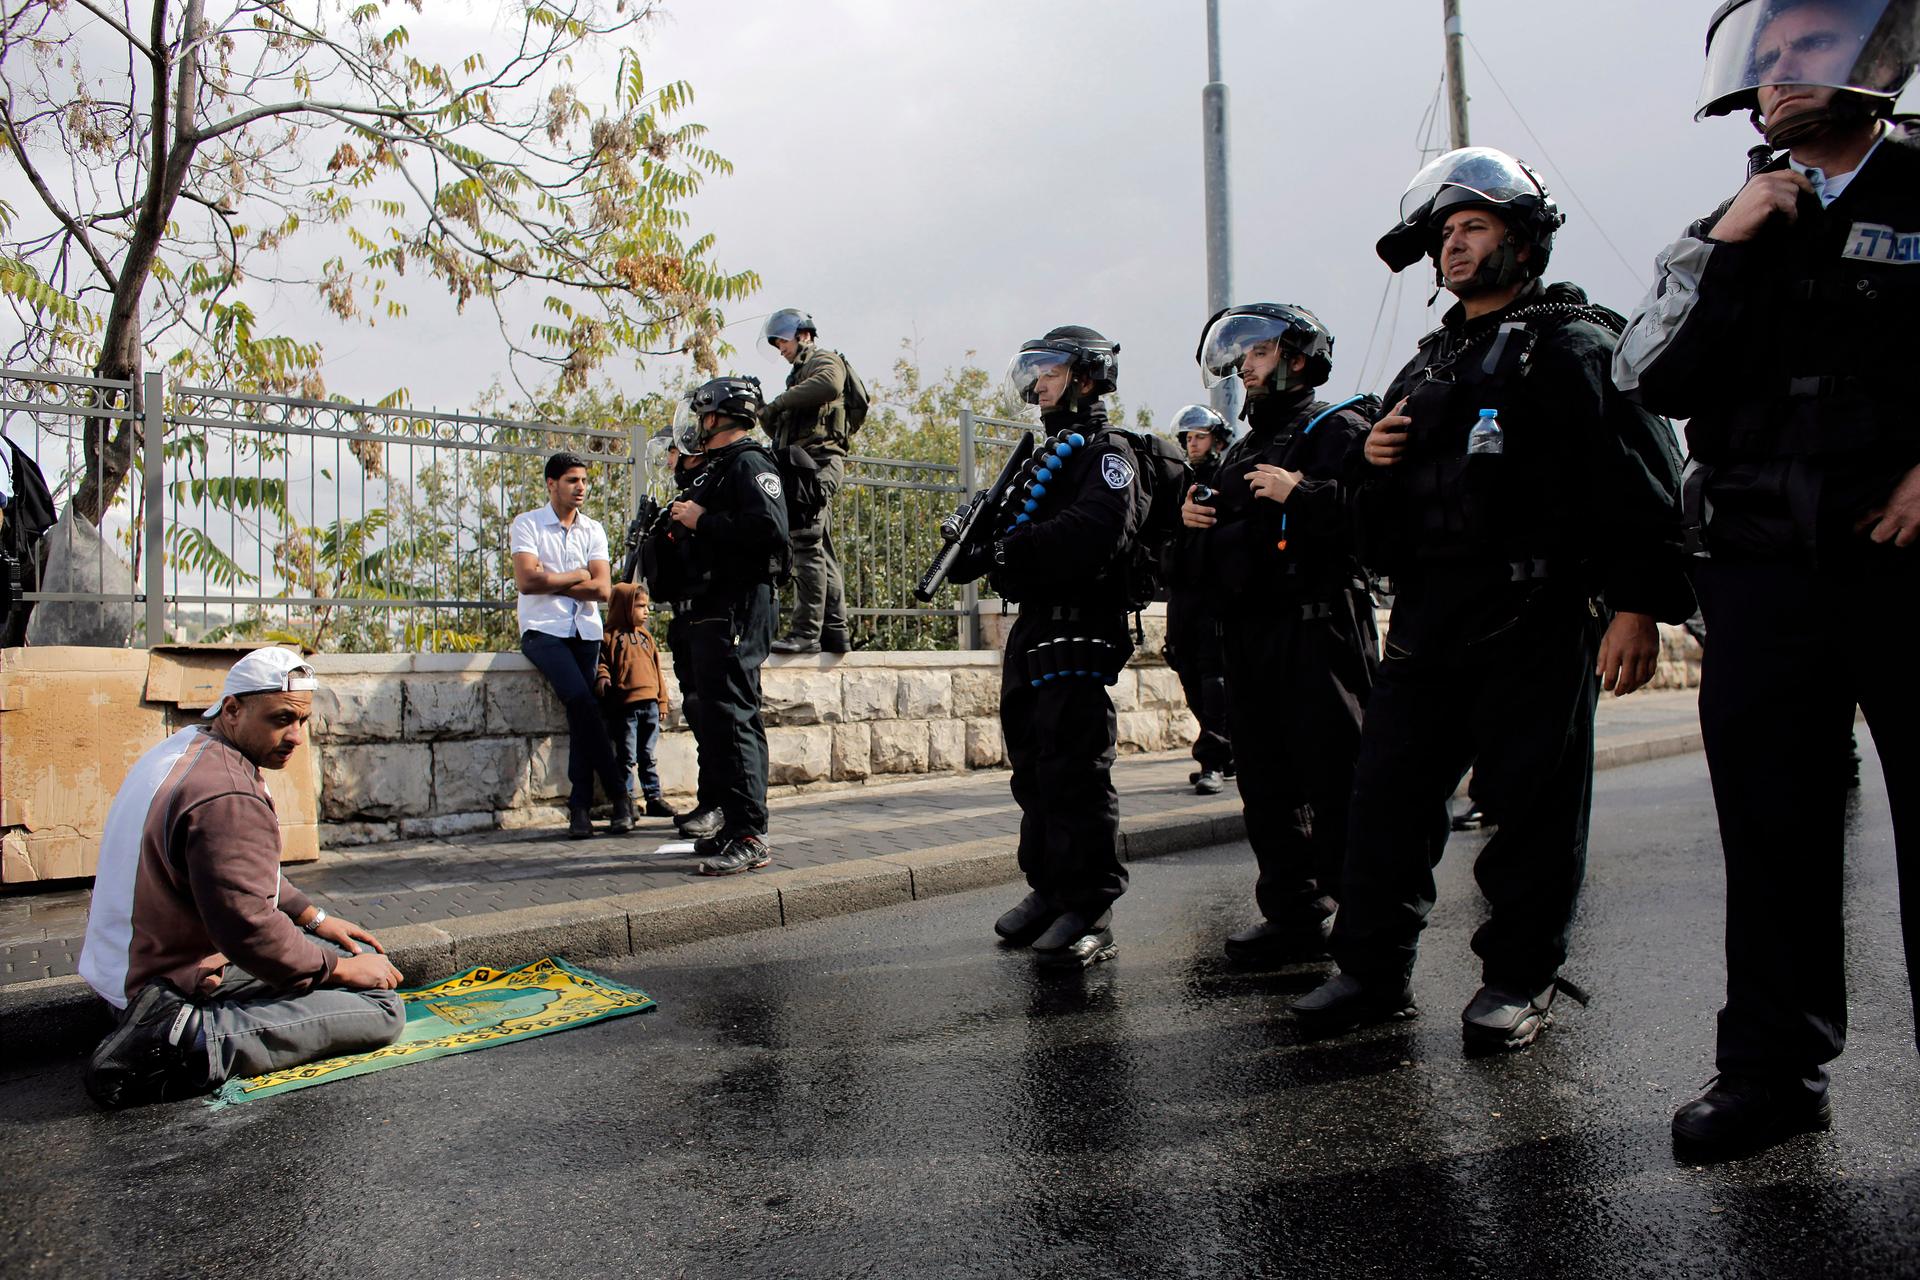 A Palestinian man prays near Israeli police during Friday prayers in the East Jerusalem neighbourhood of Wadi al-Joz on October 31, 2014. Israeli police declared an age limit on Friday for Palestinians wanting to enter the Old City, only allowing males ab